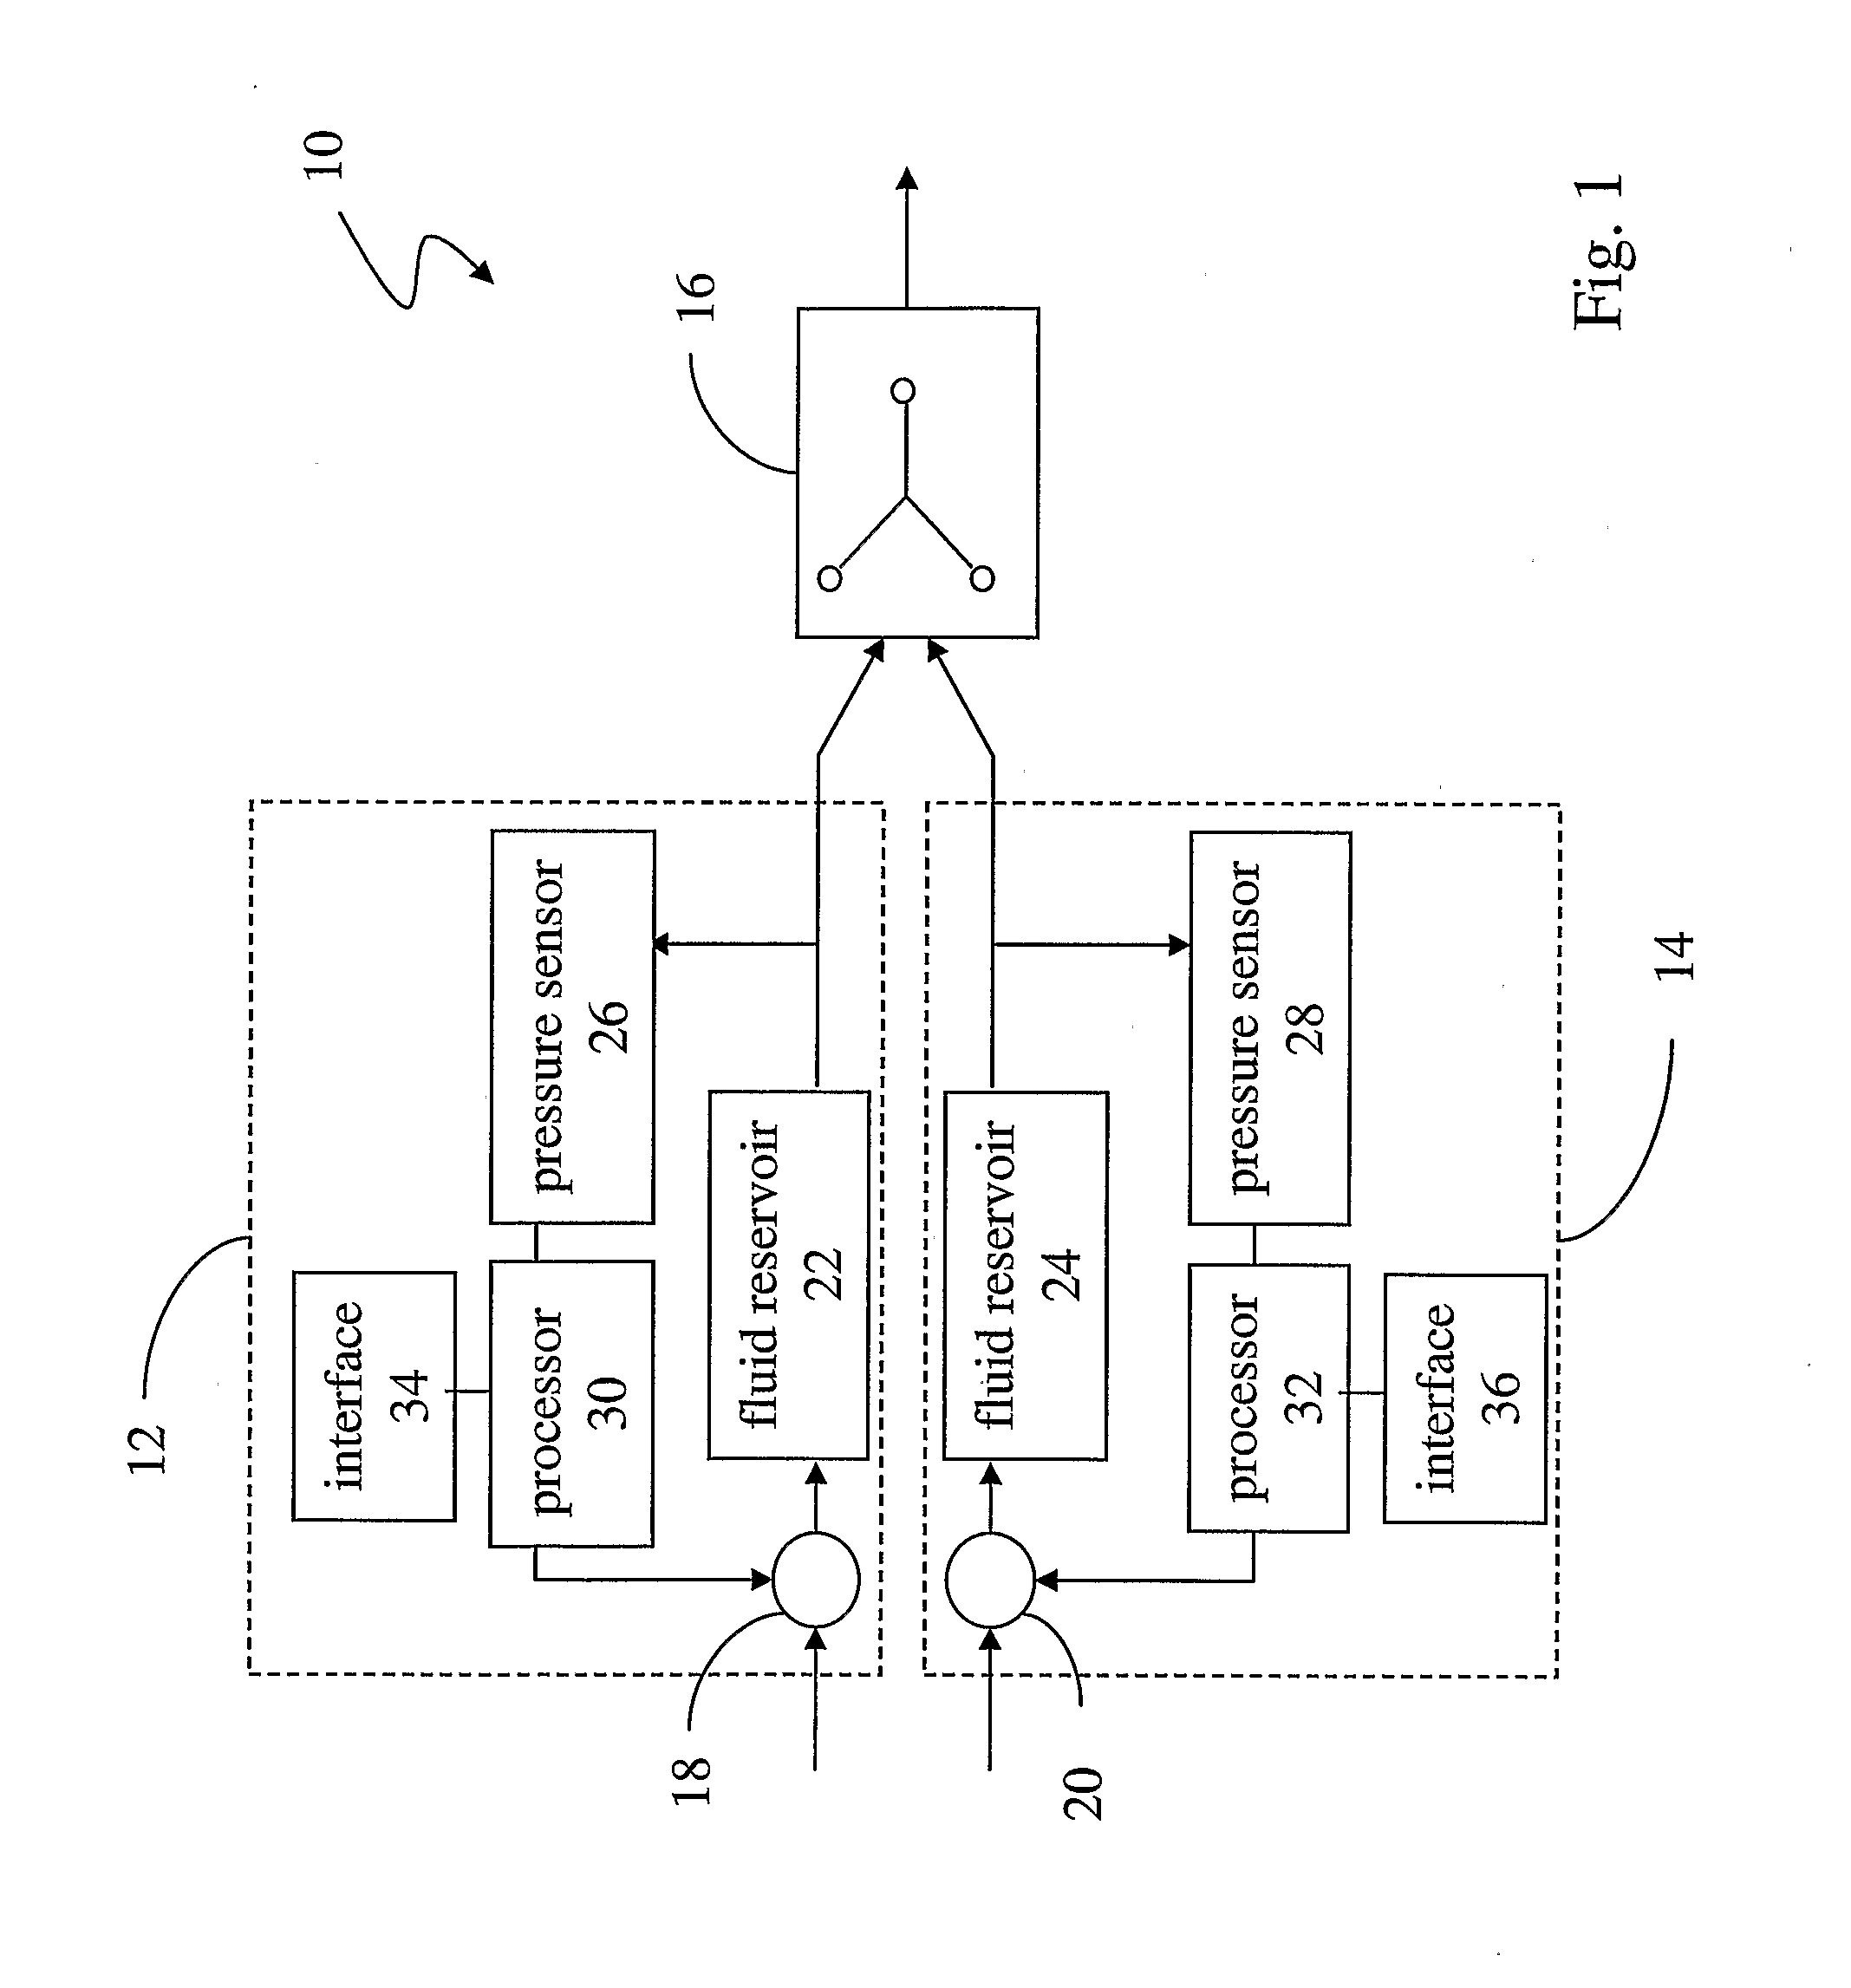 Apparatuses, Systems, and Methods Utilizing Laminar Flow Interface Control and for Controlling Laminar Flow Interface